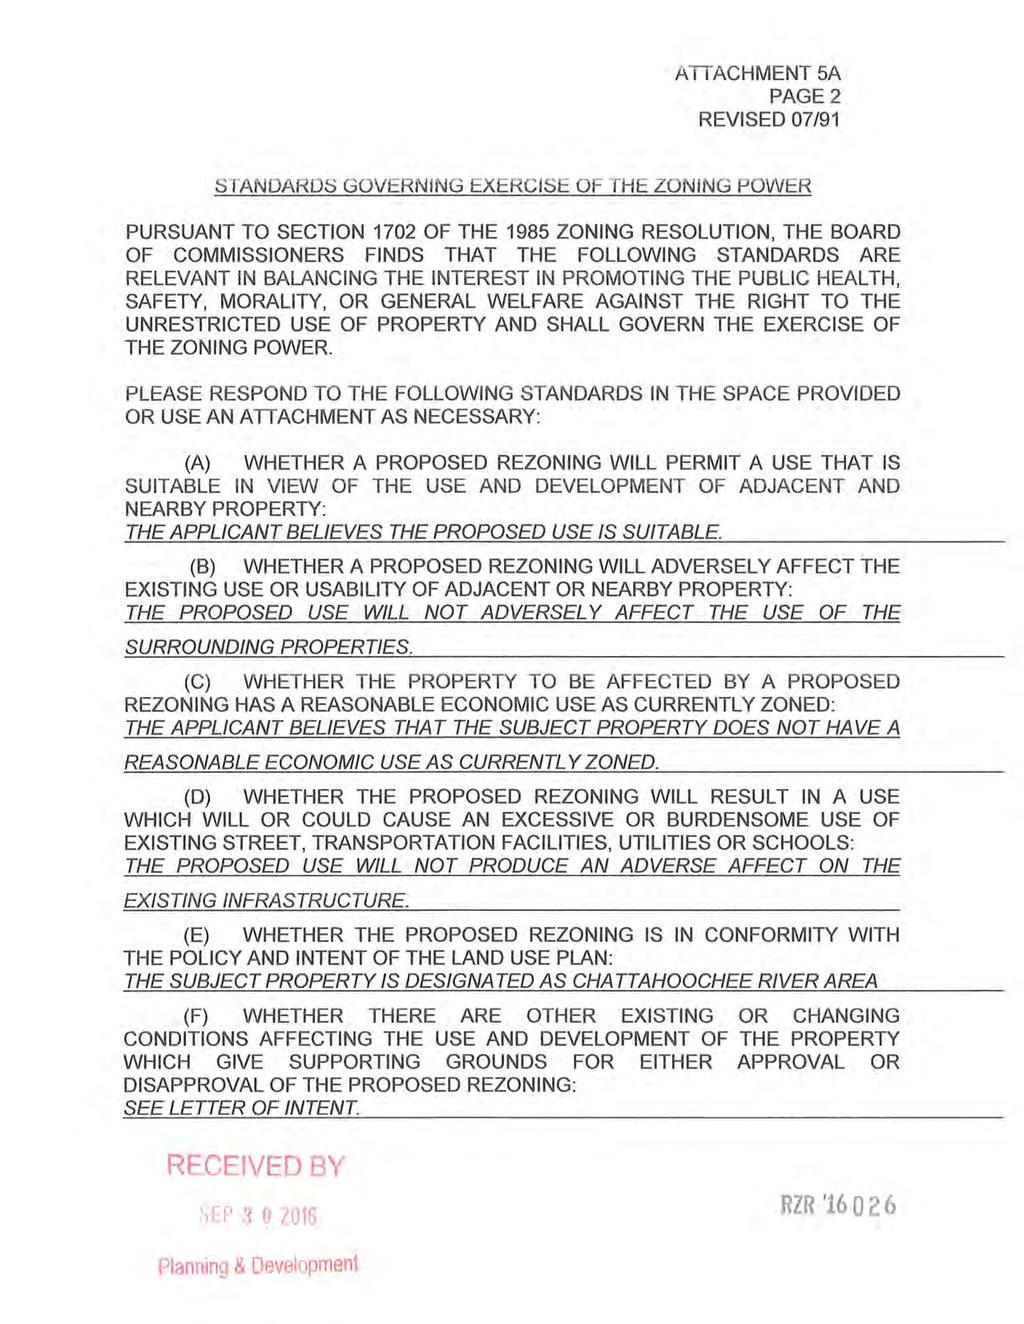 A -1 1 ACHMENT SA PAGE2 REVISED 07/91 STANDARDS GOVERNING EXERCISE OF THE ZONING POWER PURSUANT TO SECTION 1702 OF THE 1985 ZONING RESOLUTION, THE BOARD OF COMMISSIONERS FINDS THAT THE FOLLOWING